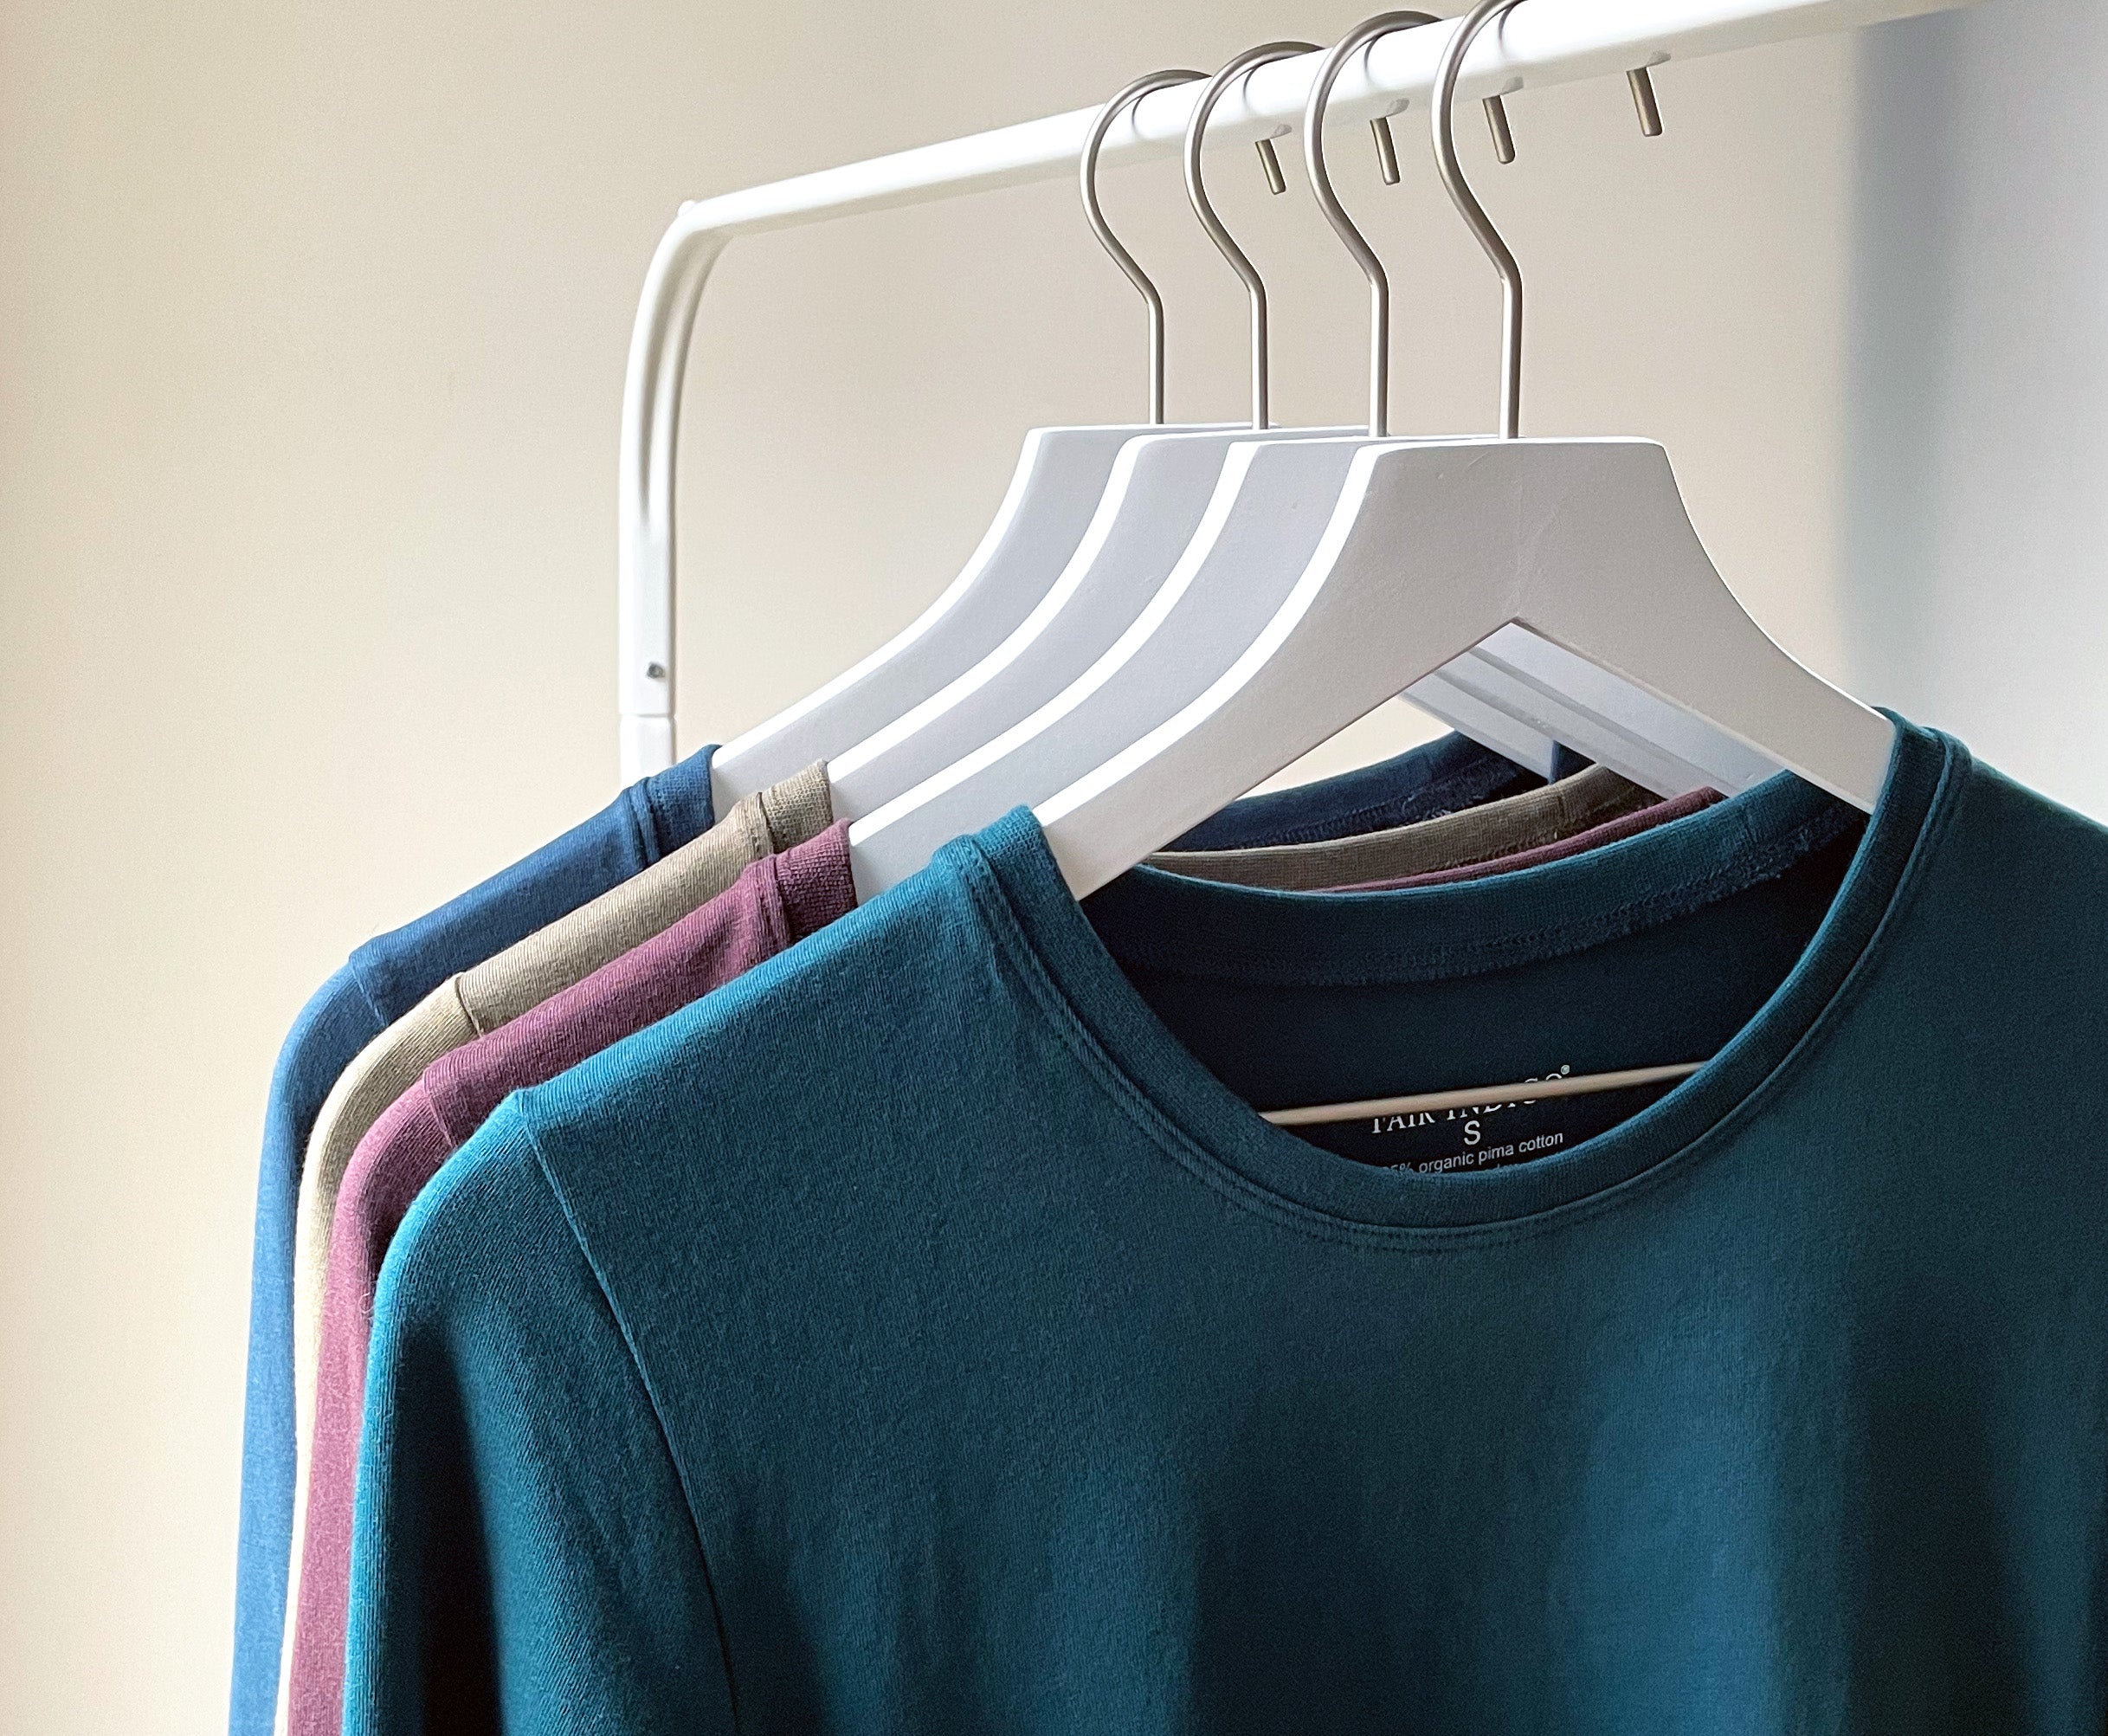 5 tips to prevent 100% cotton clothing from shrinking in the dryer